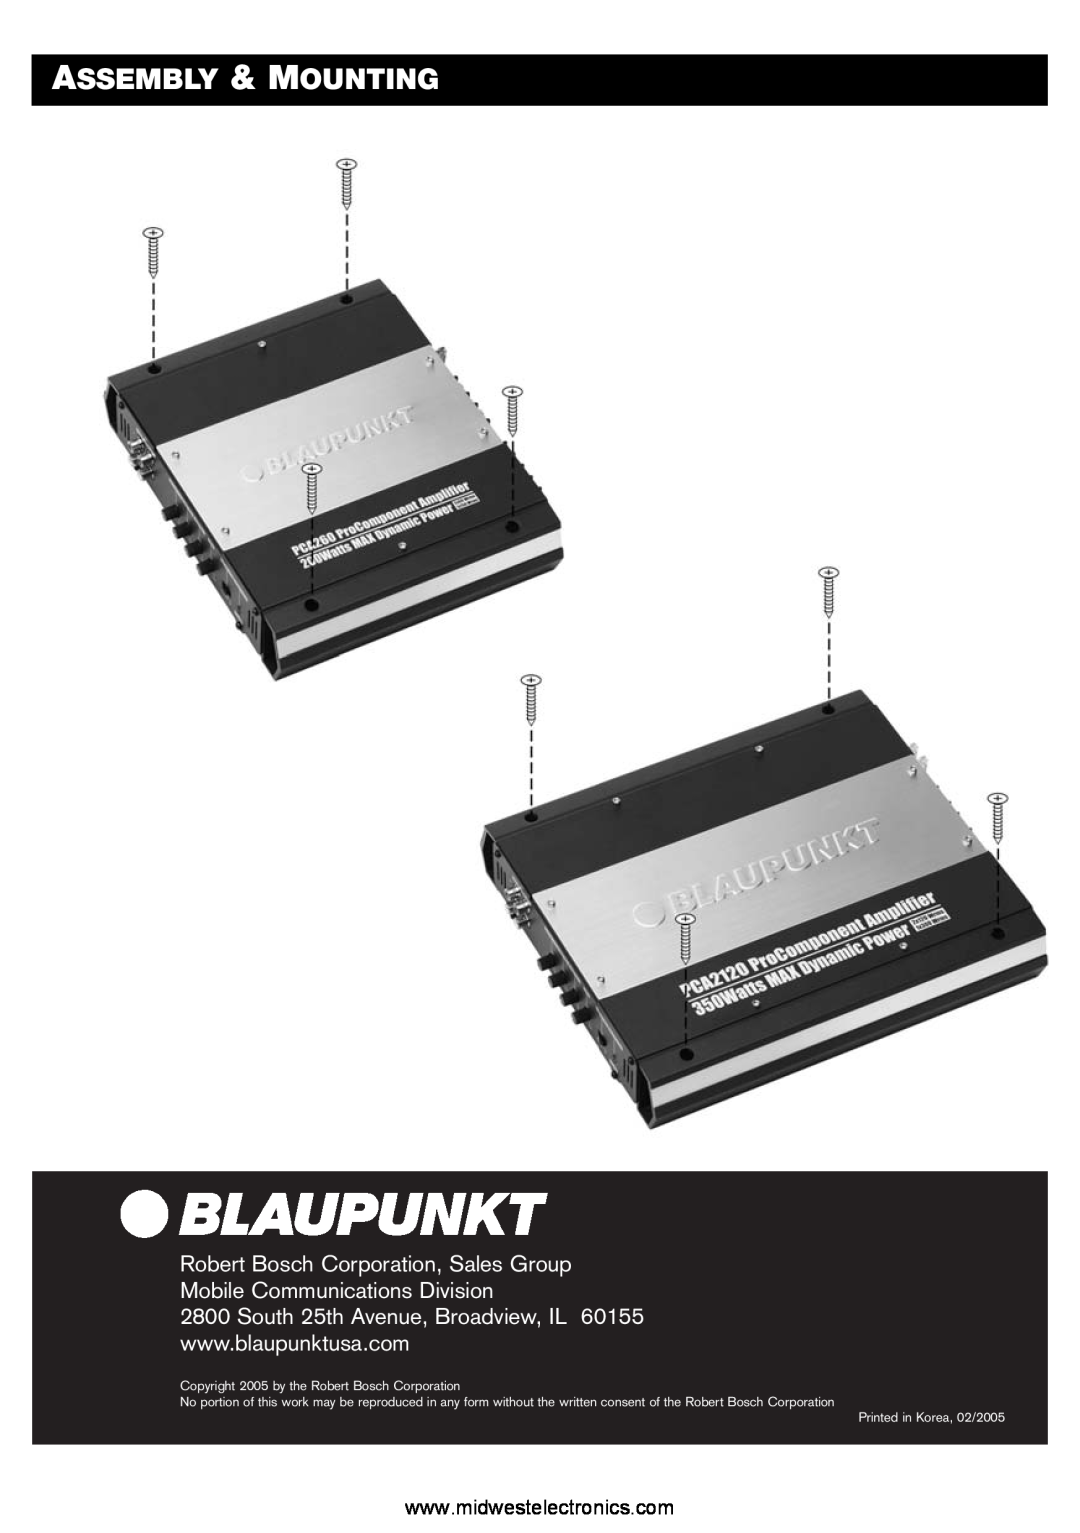 Blaupunkt PCA2120, PCA260 manual Assembly & Mounting, Copyright 2005 by the Robert Bosch Corporation 